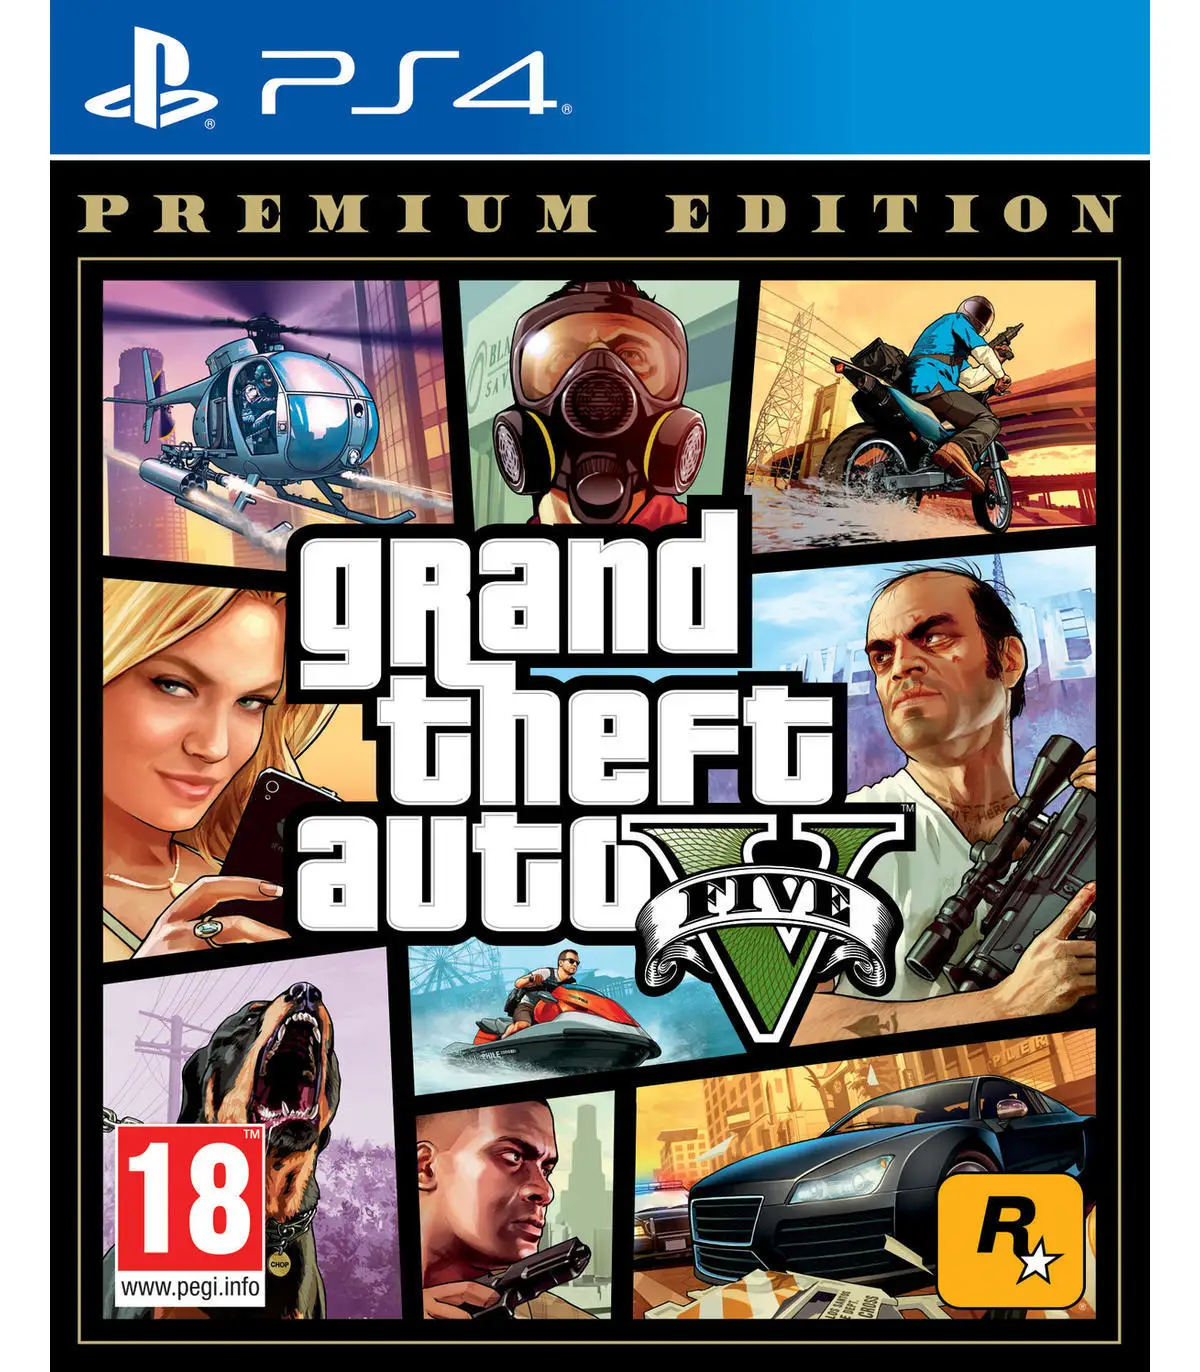 Grand Theft Auto Trilogy Definitive Edition | Grand Theft Auto Playstation 4 - Deals -